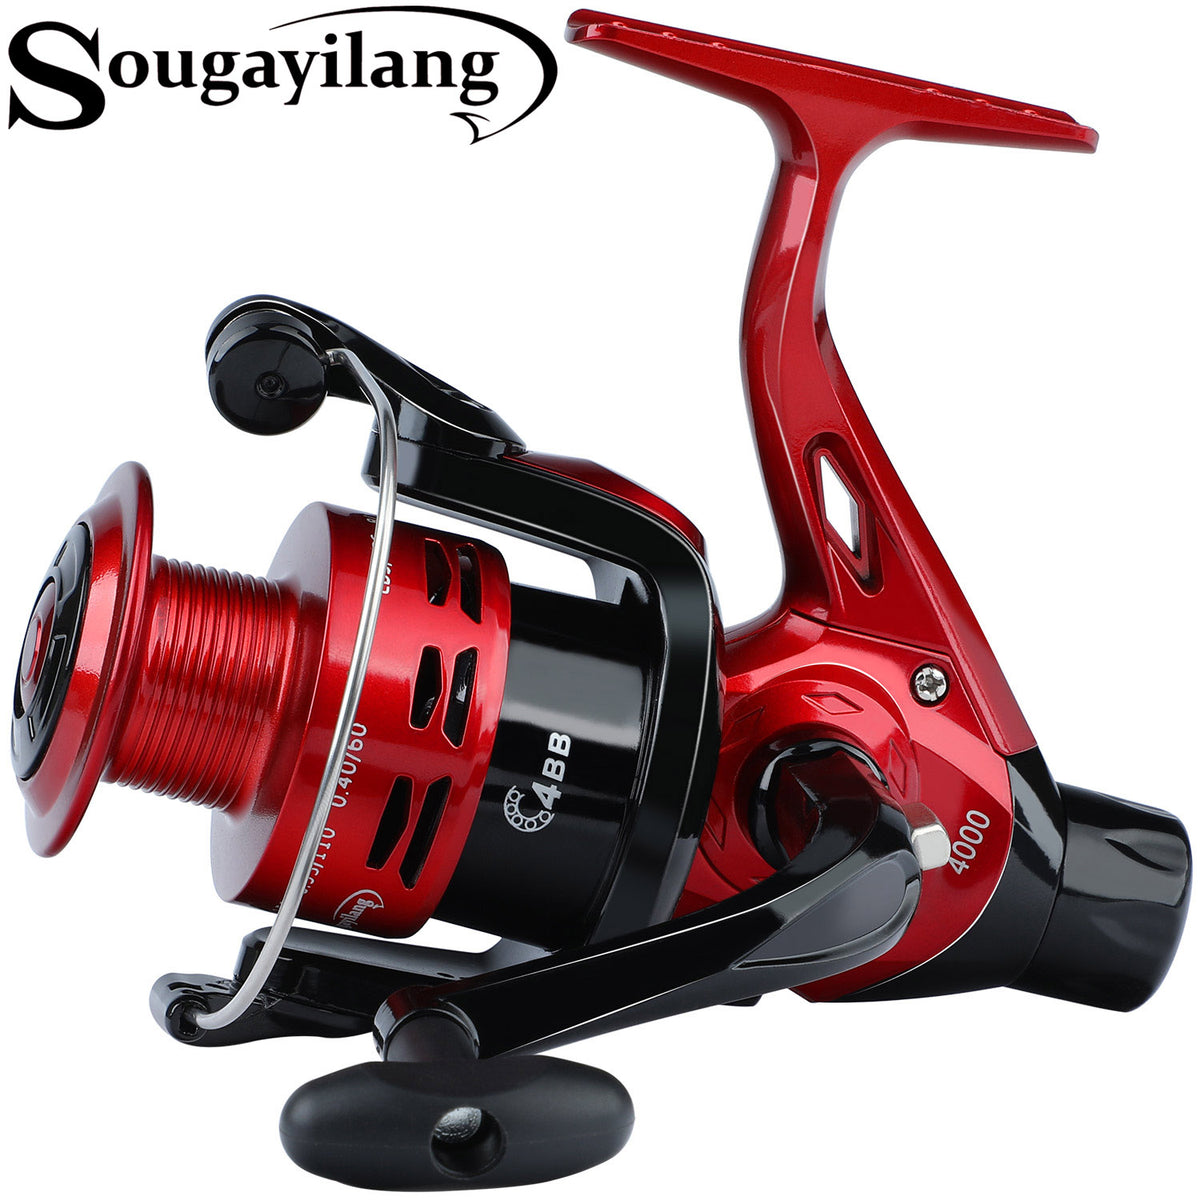 Sougayilang Beast 5000, 6000 and 9000 size Baitrunner spinning reels -  Sports & Outdoors, Facebook Marketplace